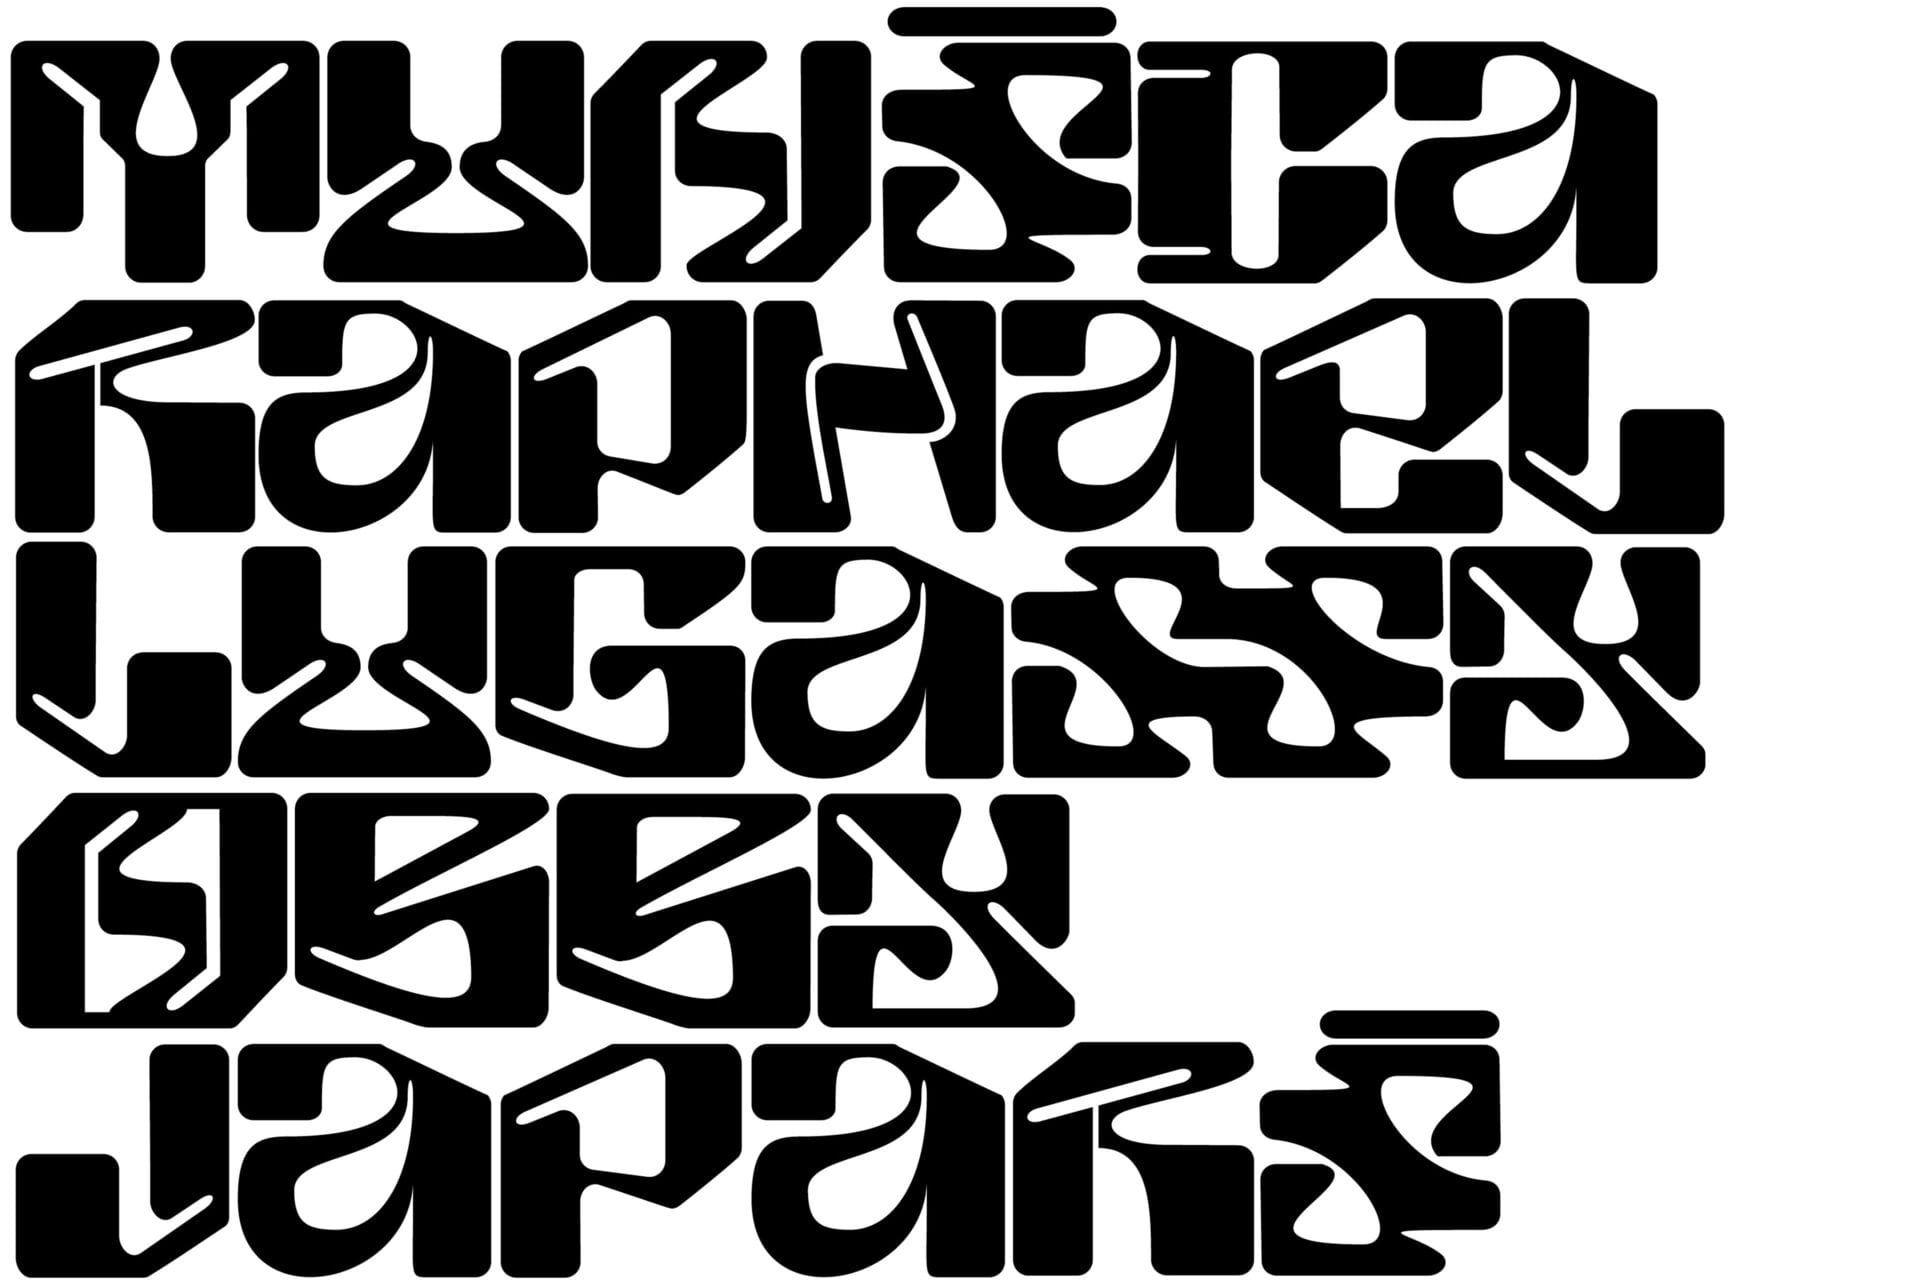 _typeface overview